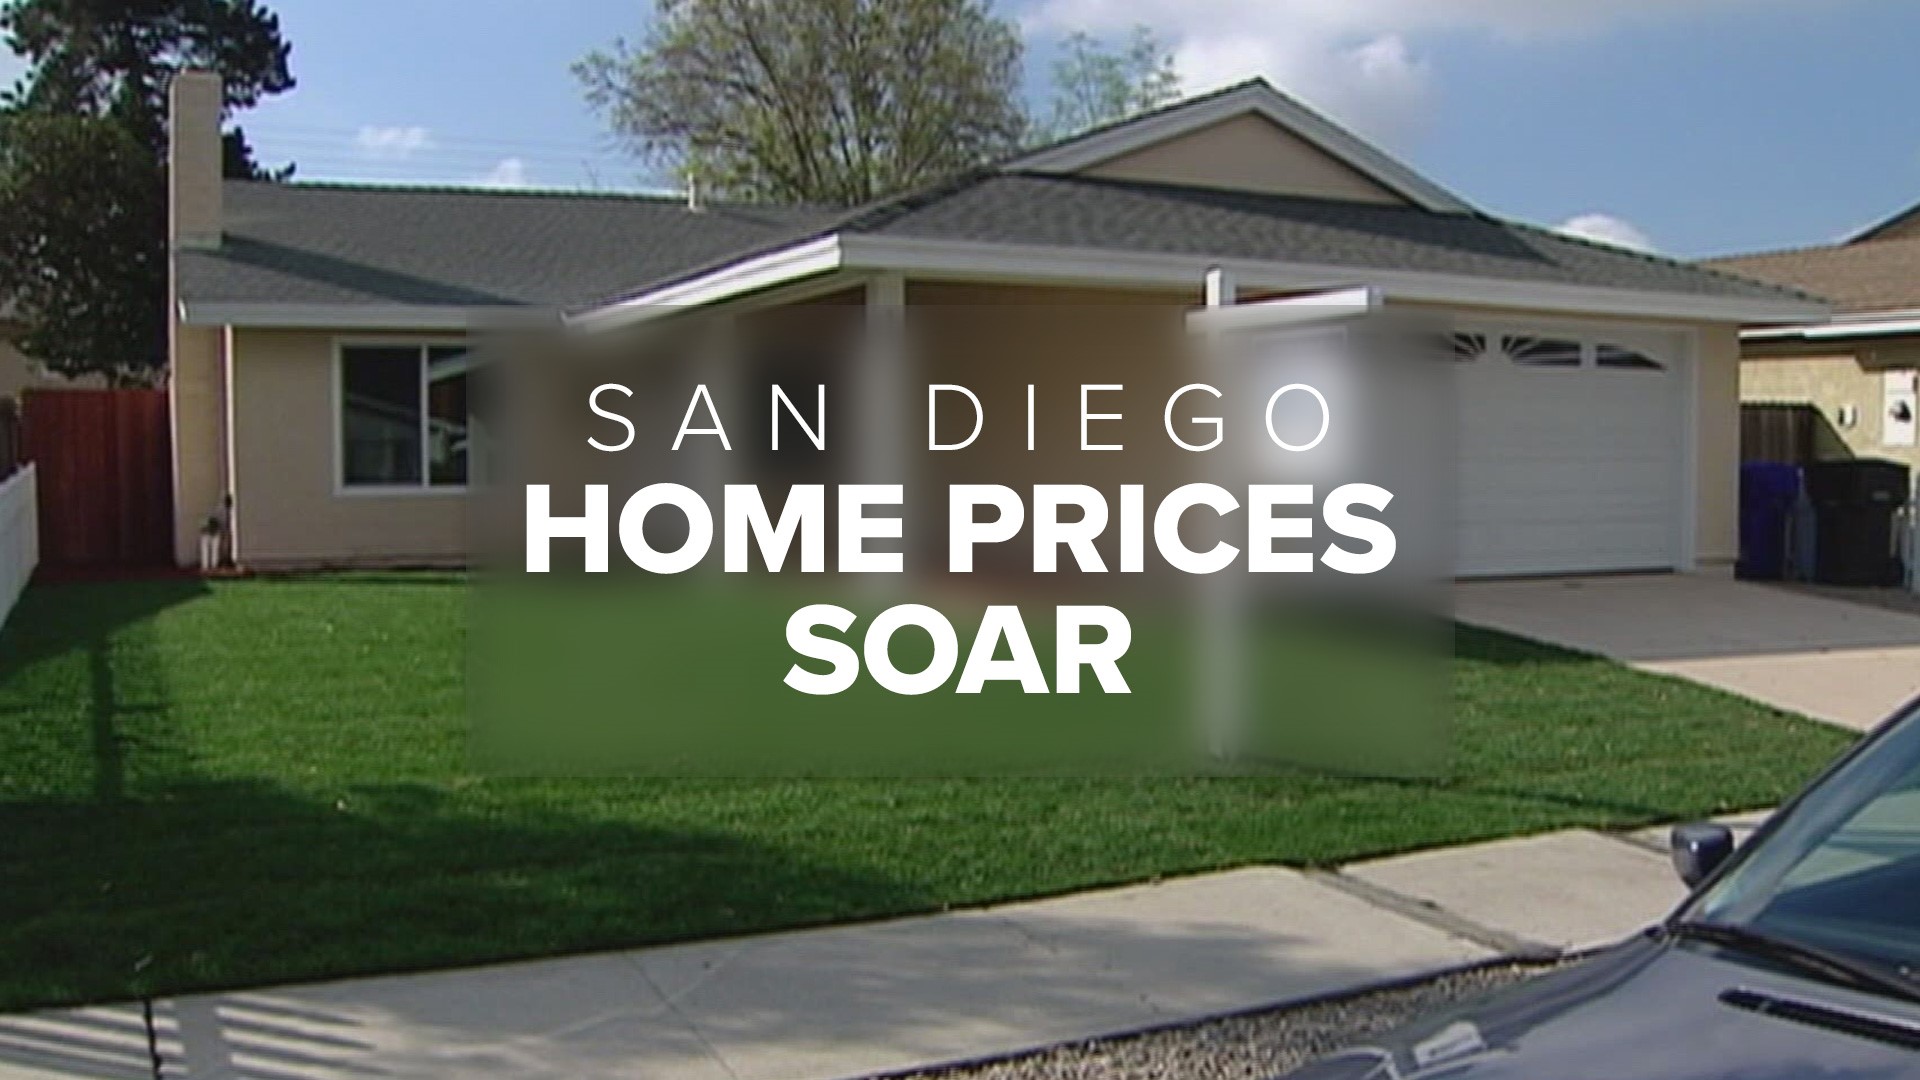 The median price for a single-family home across San Diego County was $842,000 in 2021, with condos and townhomes at $545,000.